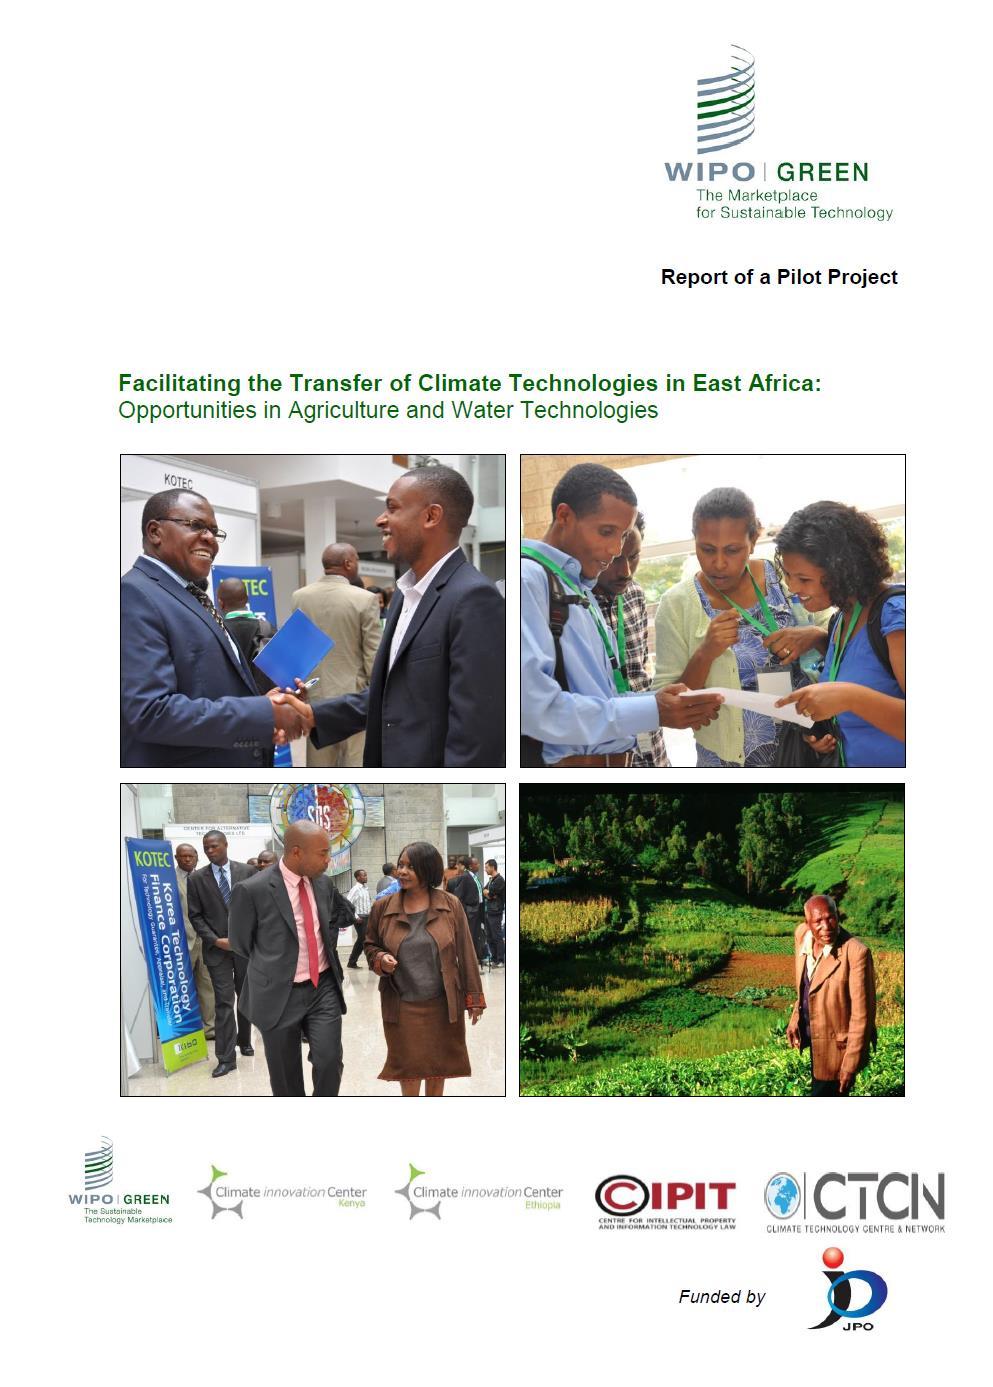 Matchmaking project in East Africa on wastewater technologies Identification of 70 needs in Ethiopia, Kenya and Tanzania Survey of solutions responding to those needs Matchmaking event April 5-7,